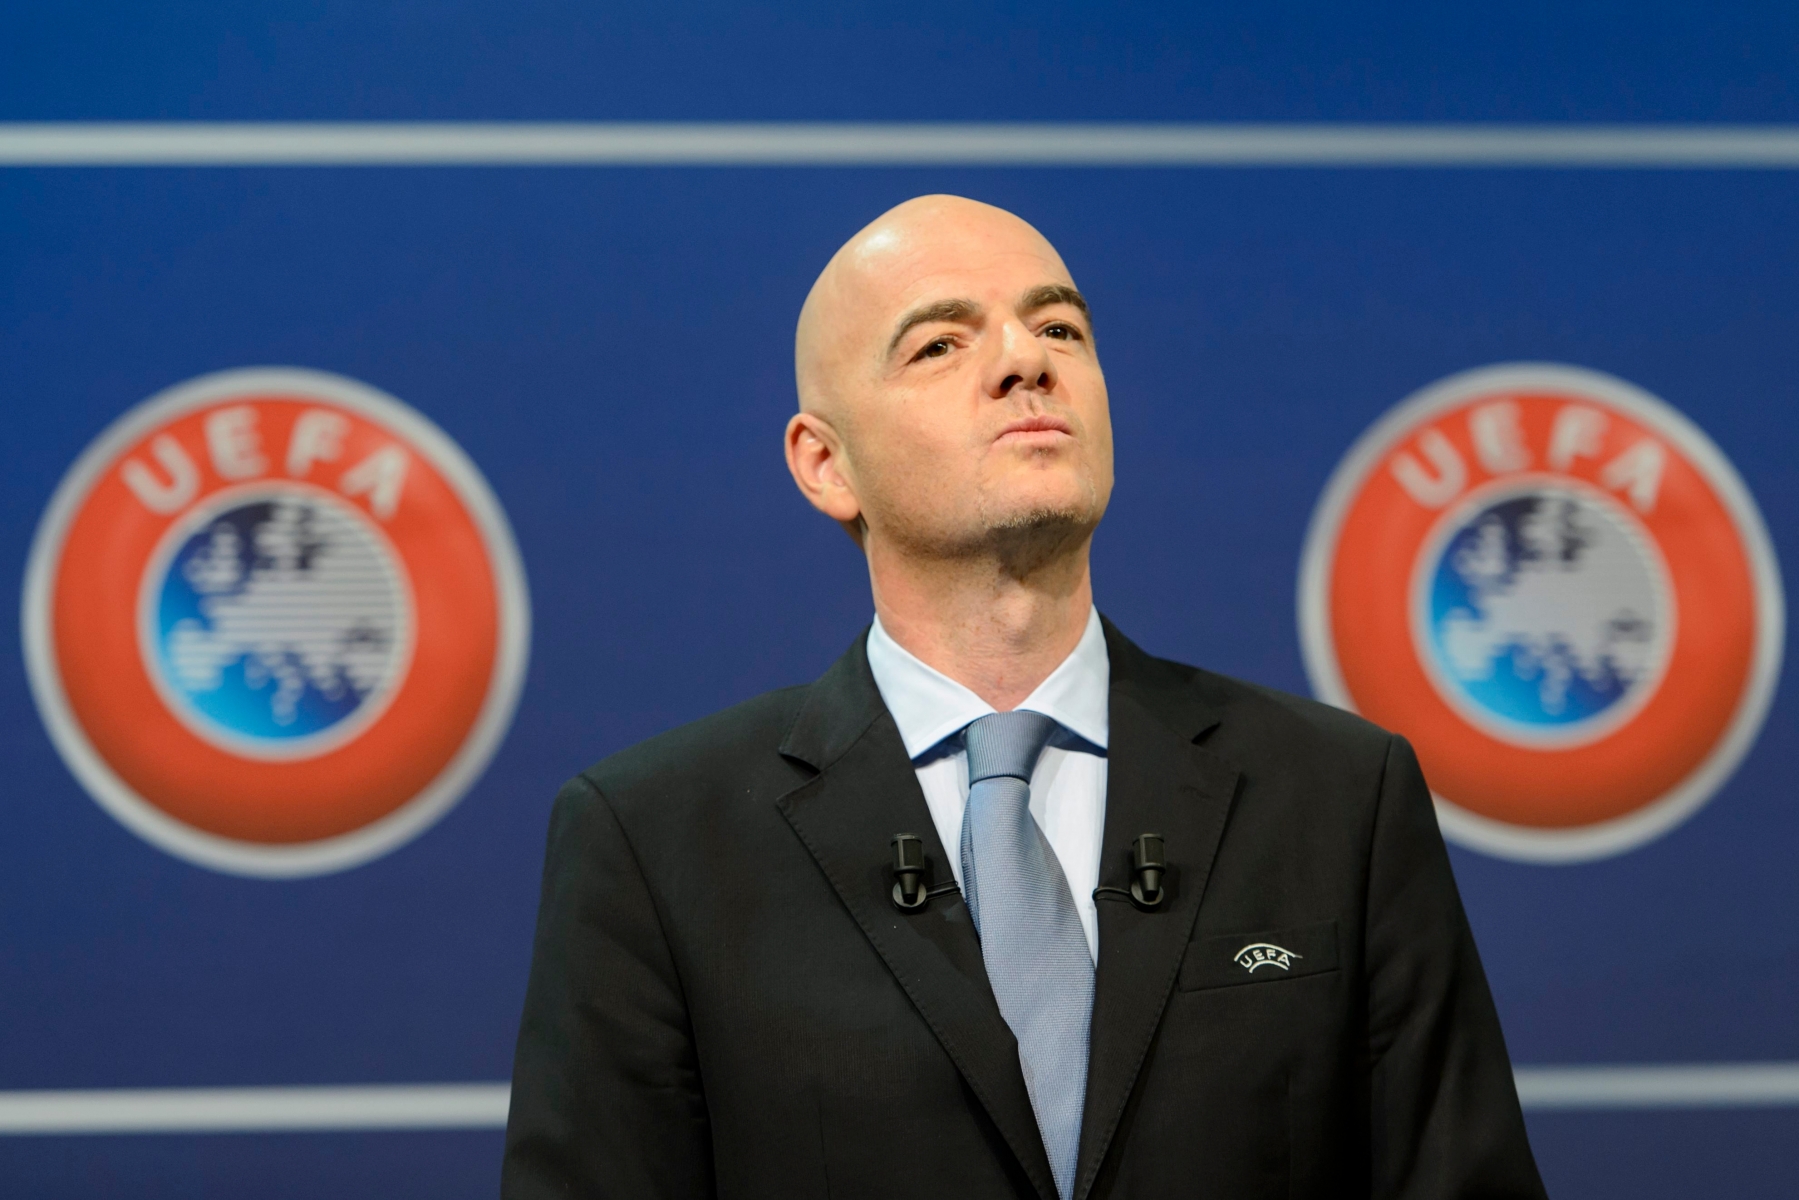 epa04997167 (FILE) A file picture dated 18 Ocotber 2015 shows UEFA General Secretary Gianni Infantino, during the draw for the play-off matches for UEFA EURO 2016 at the UEFA Headquarters, in Nyon, Switzerland. According to a statement by the UEFA on 26 October 2015, Infantino is bidding to become the next president of FIFA. The election will take place at an extraordinary FIFA congress in Zurich on 26 February.  EPA/JEAN-CHRISTOPHE BOTT FILE SWITZERLAND SOCCER FIFA PRESIDENCY